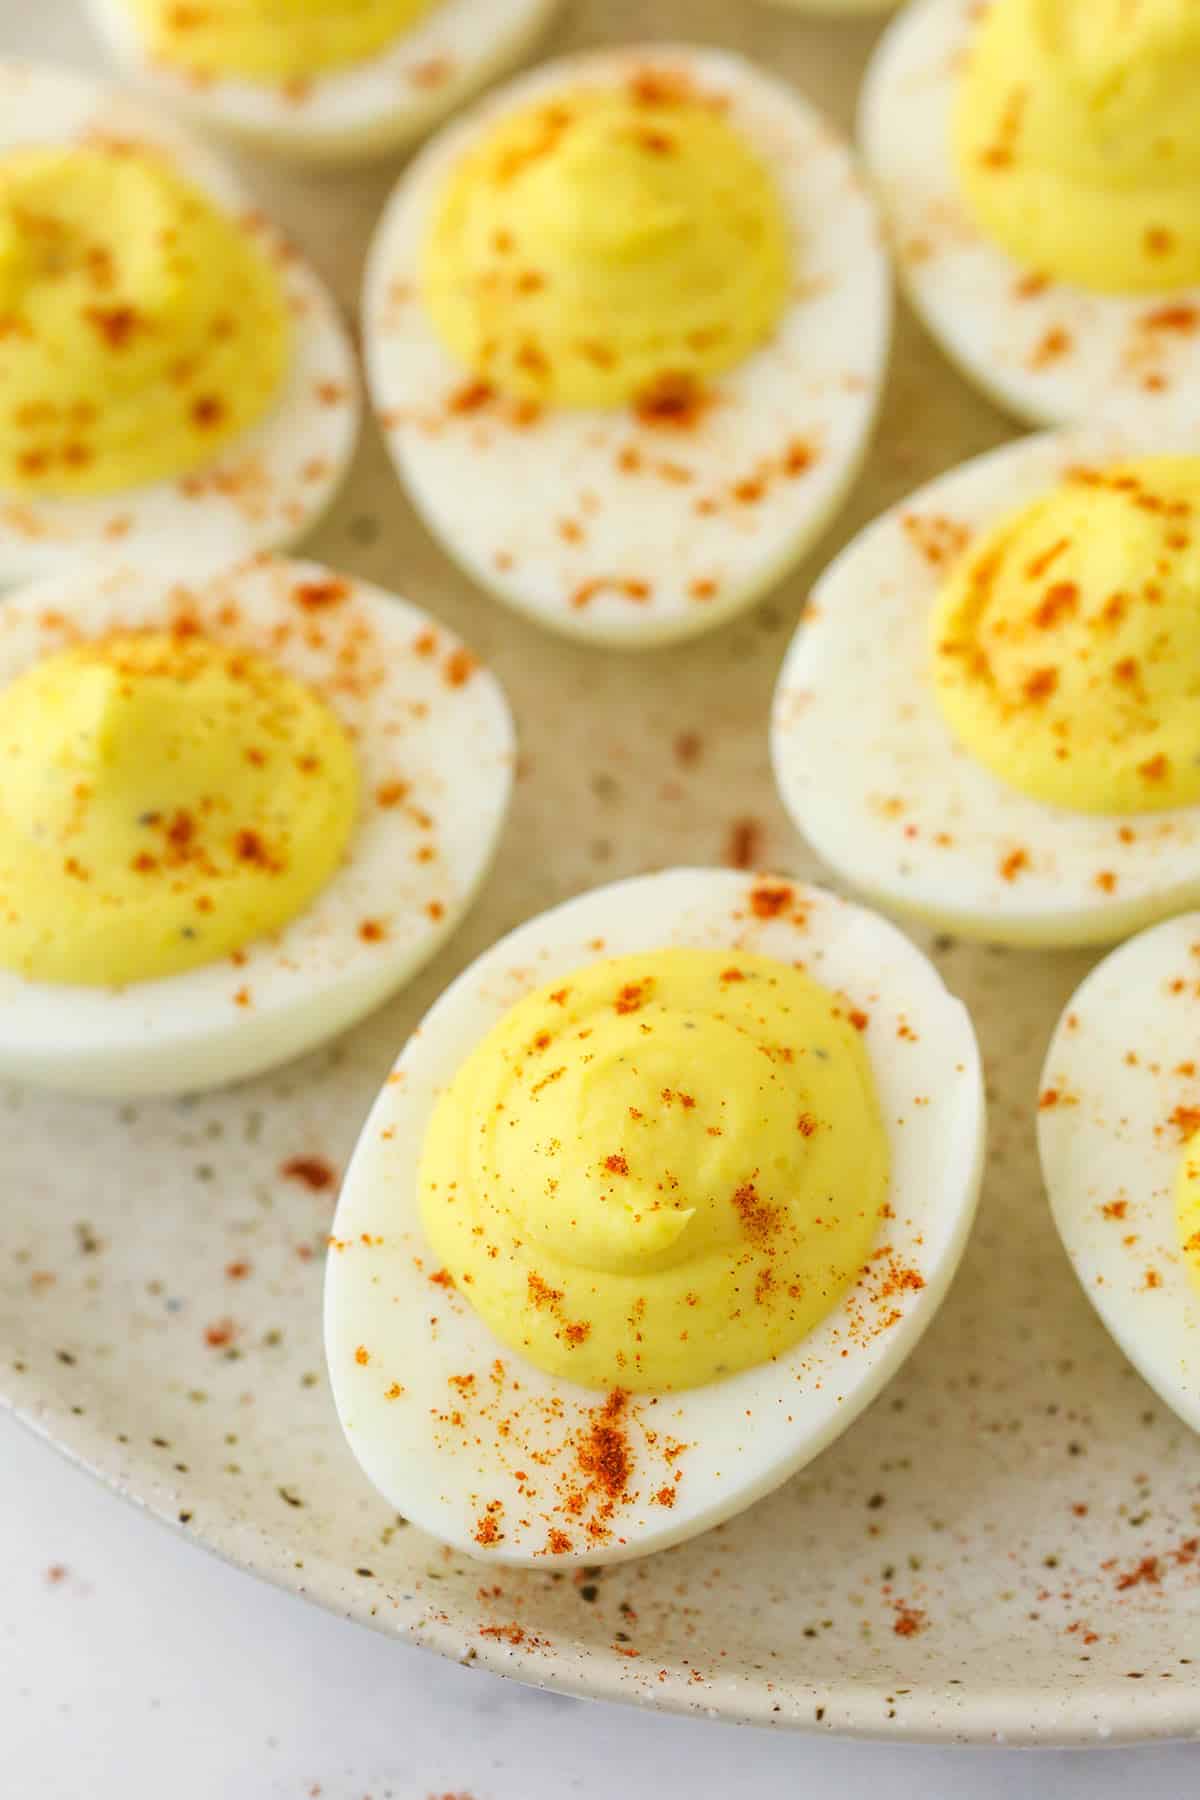 Closeup image of deviled eggs on a serving plate.